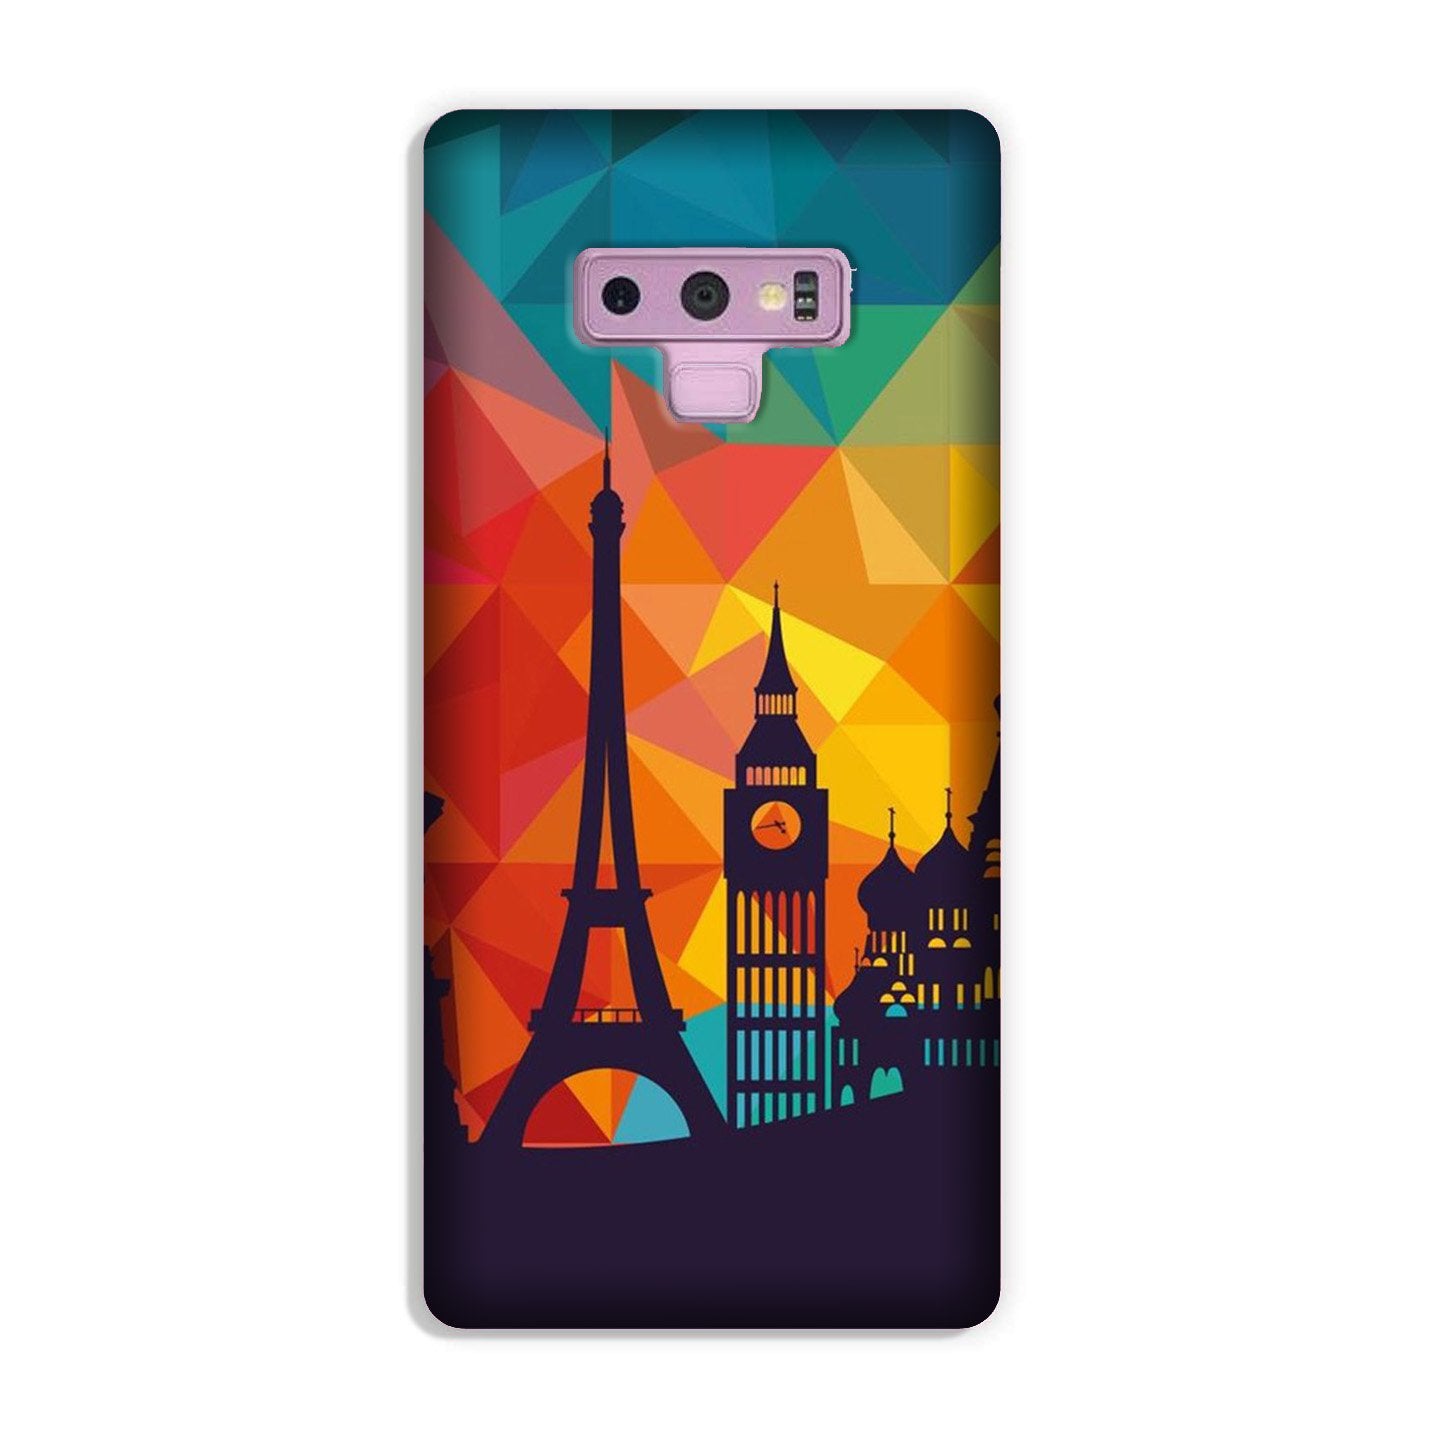 Eiffel Tower2 Case for Galaxy Note 9